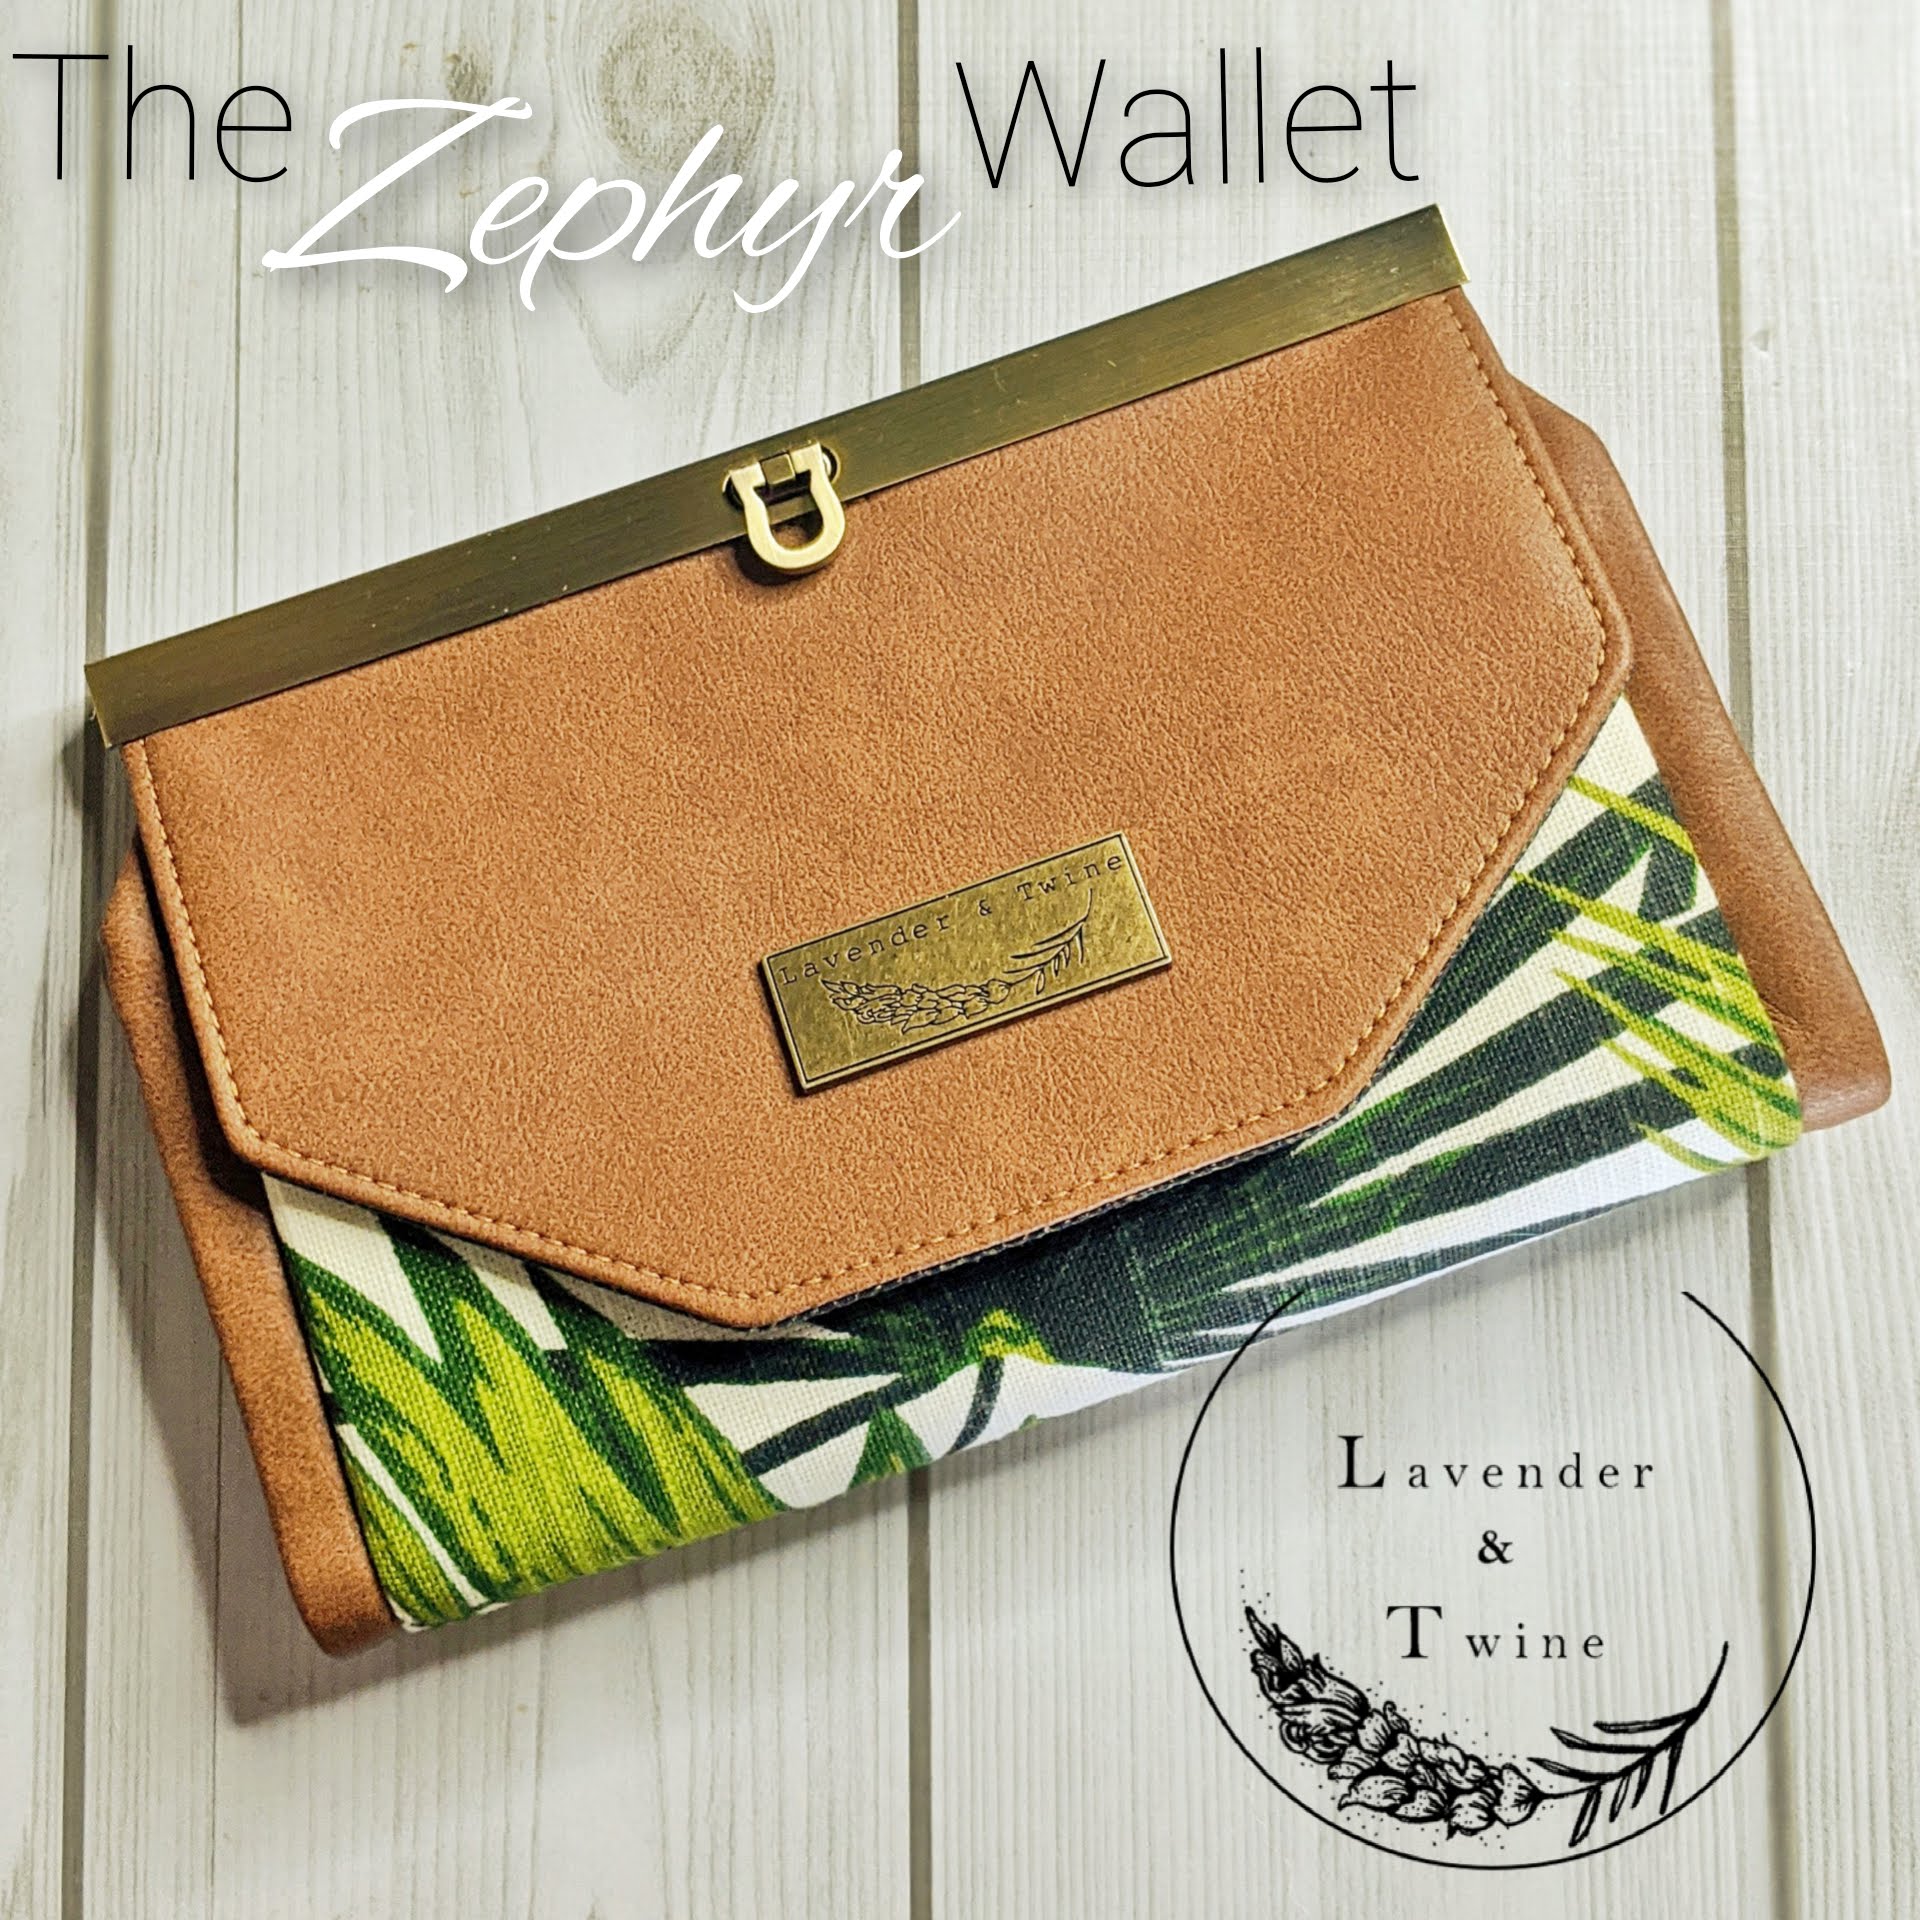 The Zephyr Wallet PDF Pattern with Videos